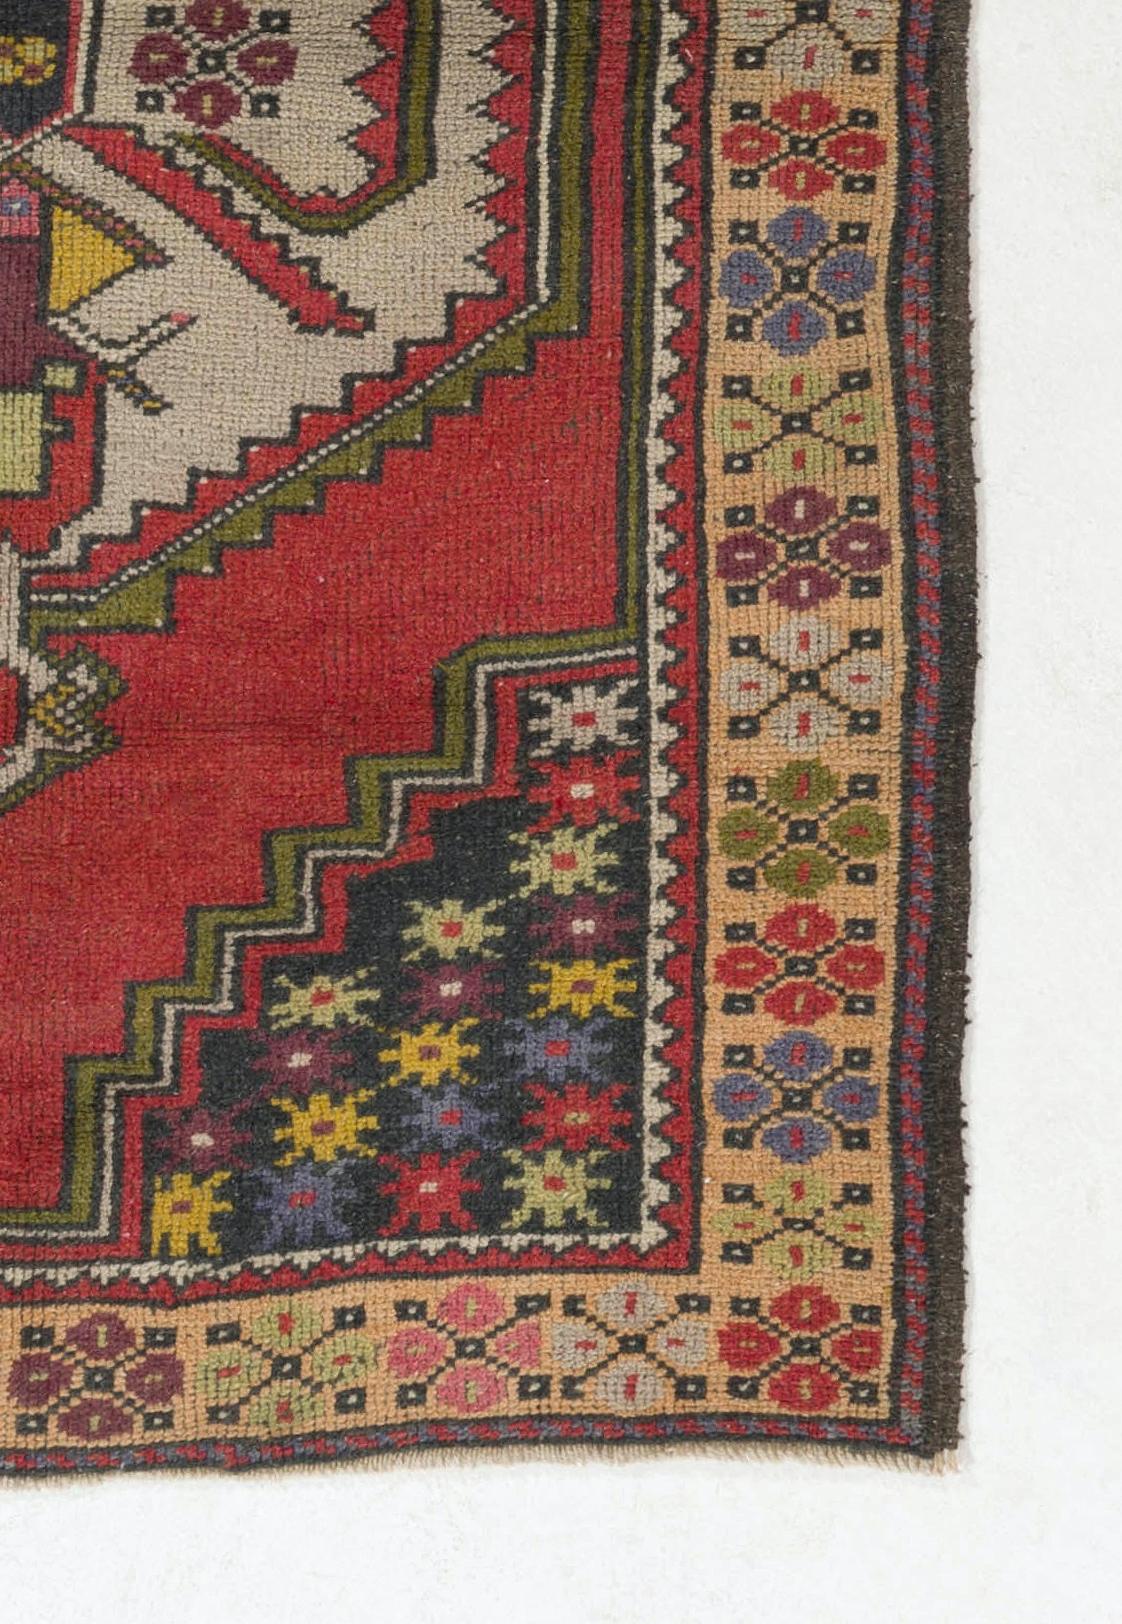 Tribal 4x6 Ft Vintage Turkish Village Rug. Traditional Wool Oriental Carpet from 1950s For Sale